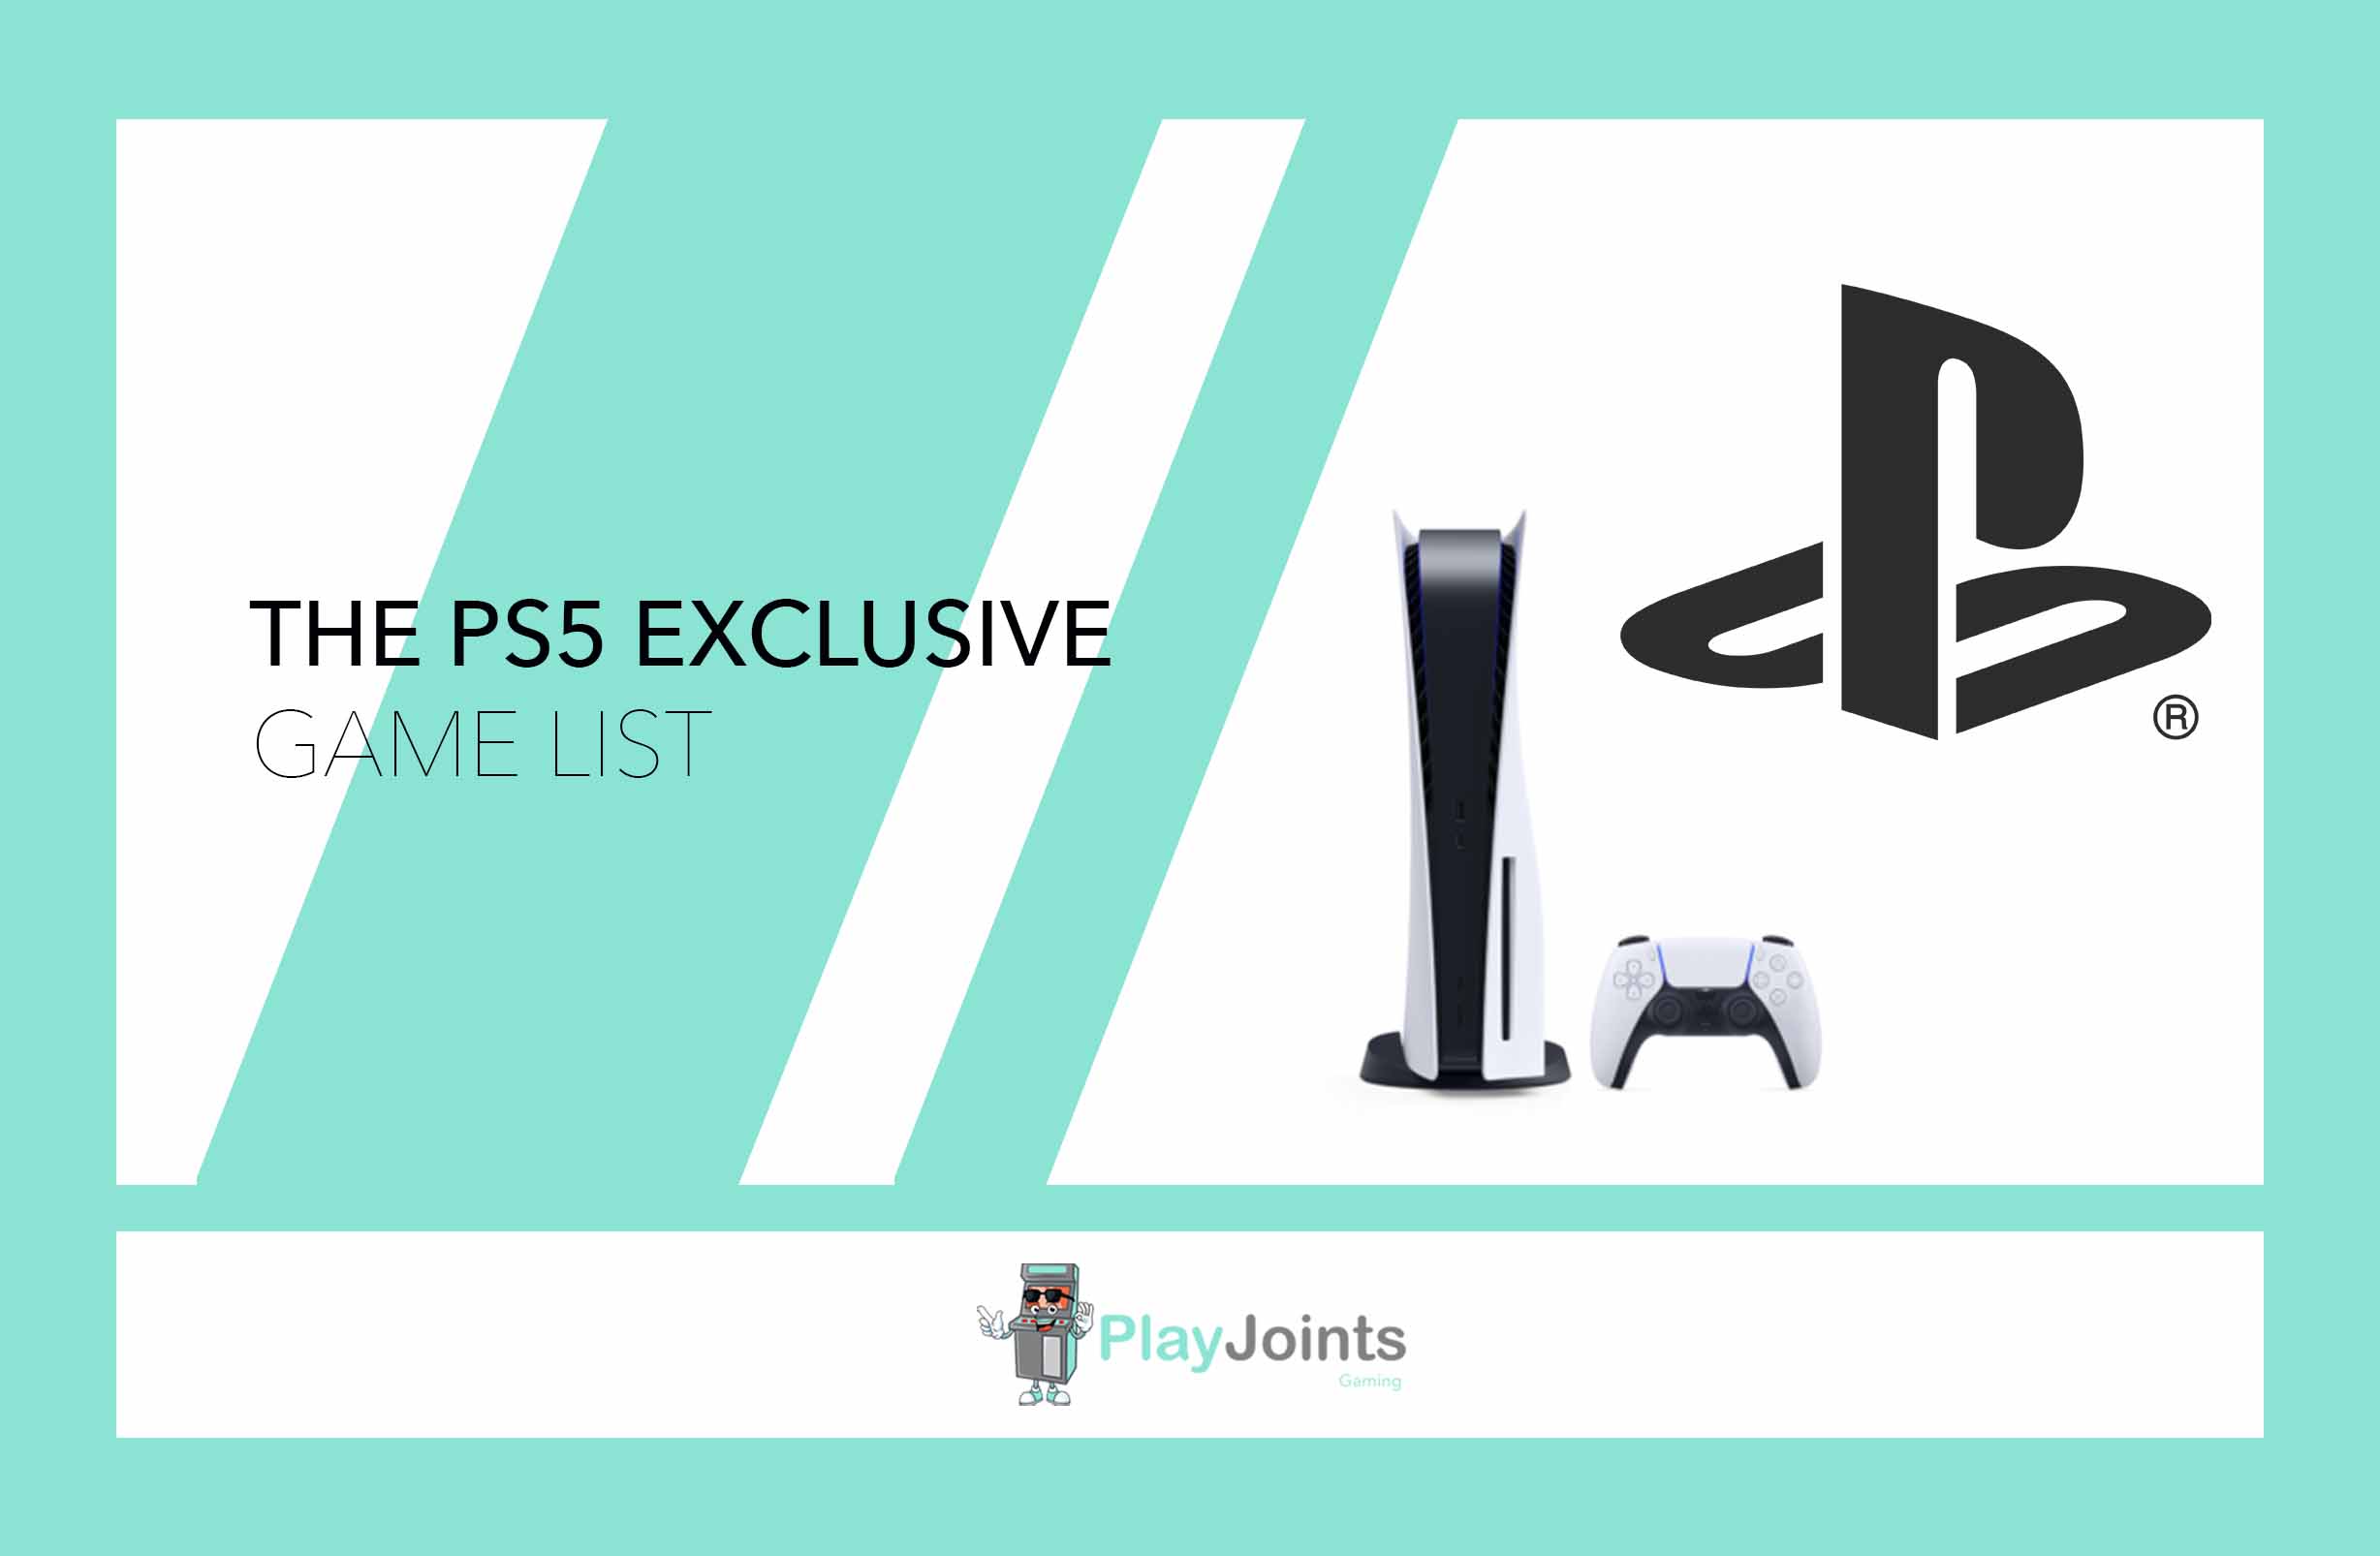 The PS5 Exclusive Games List